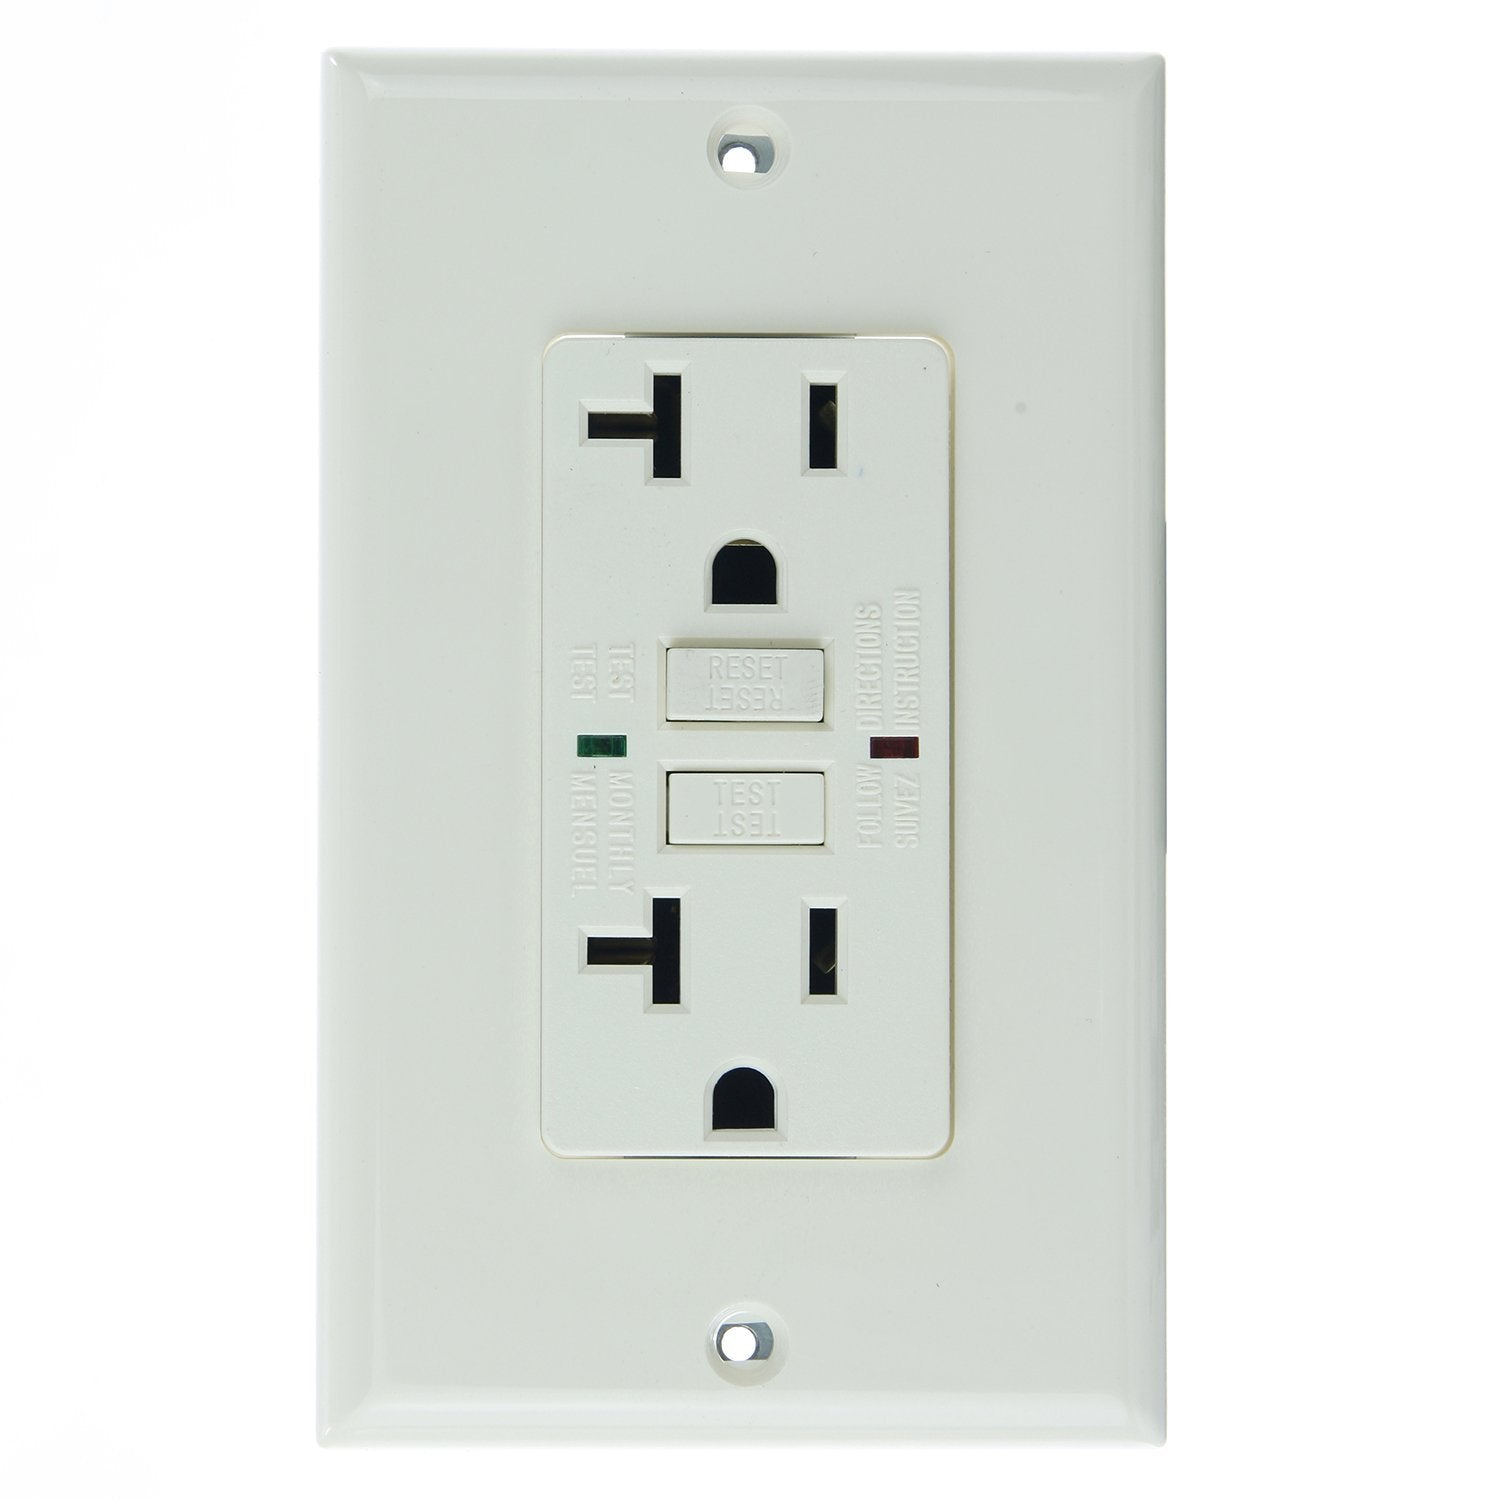 Sunlite 55403-SU E543 20A GFCI with Red and Green LED Indicator Duplex Receptacle and Plate, Almond Face